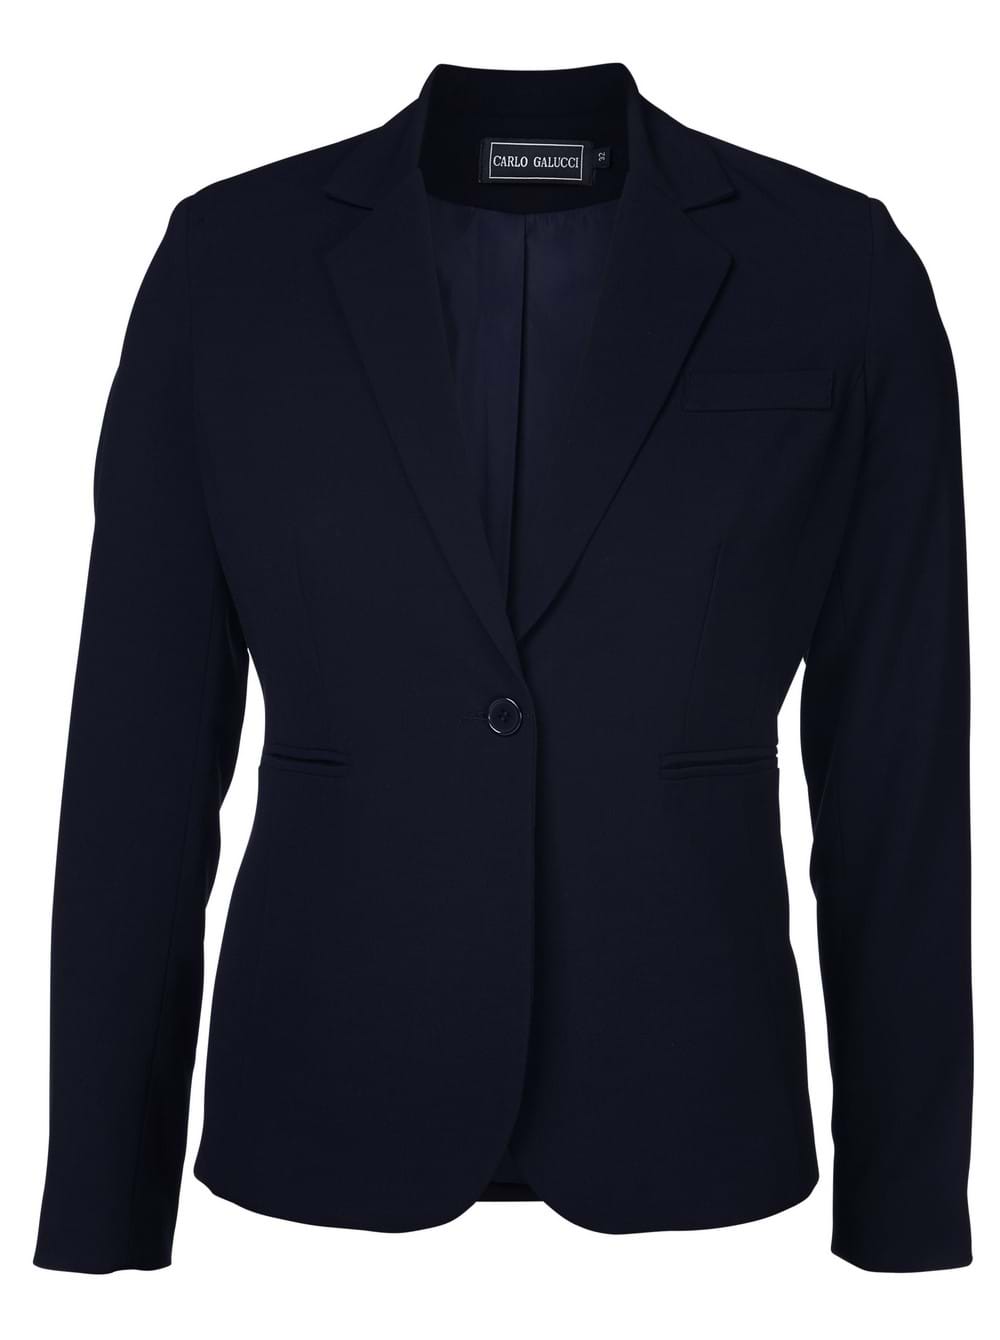 Justine 599 Tailored Fit Jacket - Navy